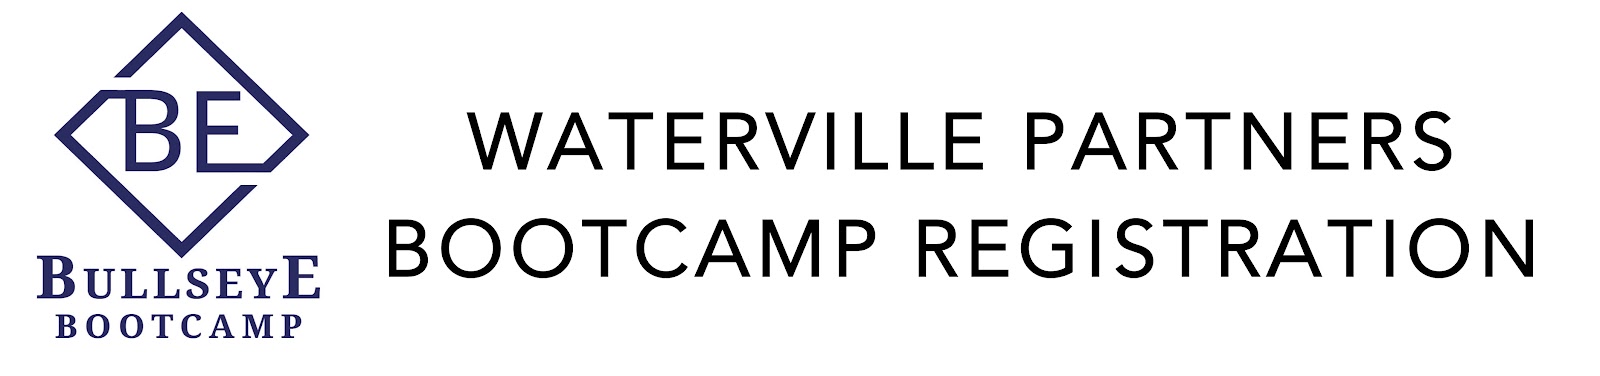 Thank you for your interest in Waterville Partners BootCamps!